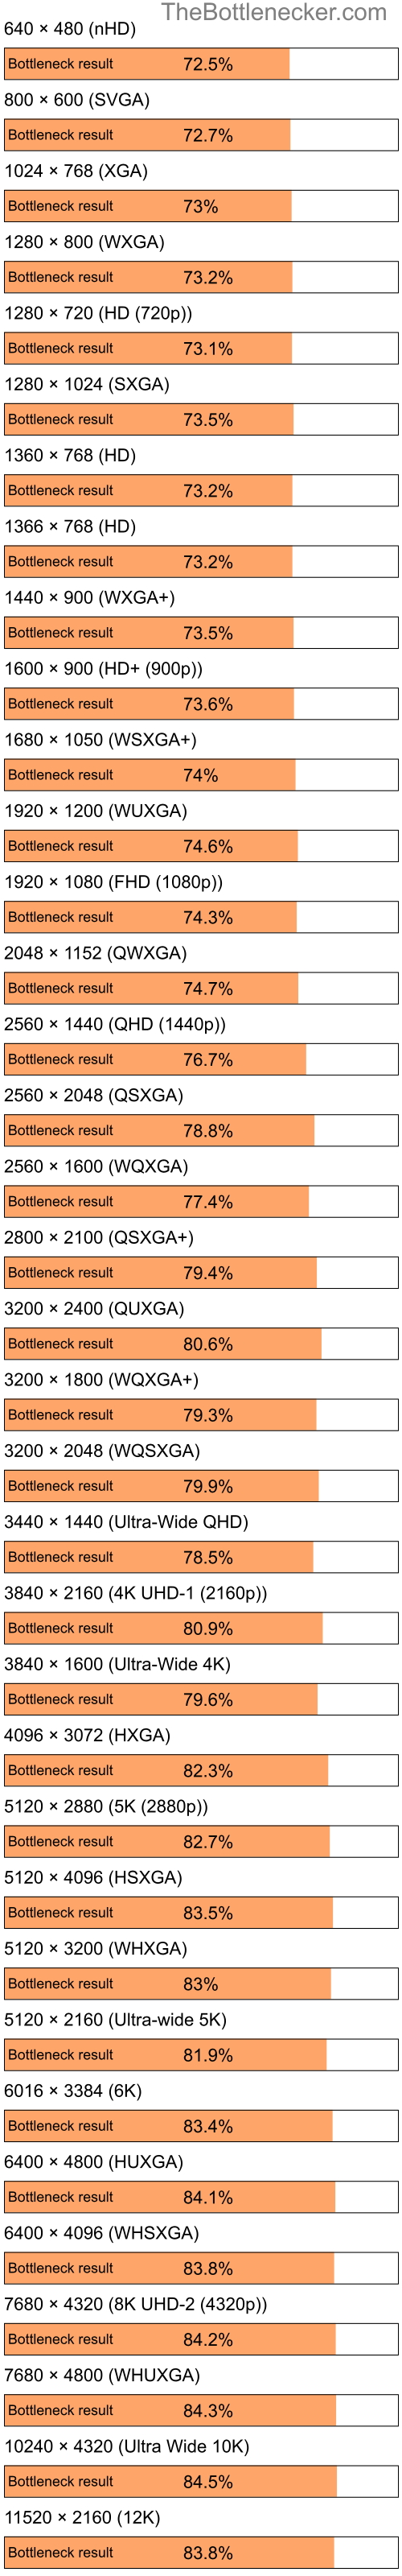 Bottleneck results by resolution for Intel Celeron and NVIDIA GeForce 9400M G in Graphic Card Intense Tasks